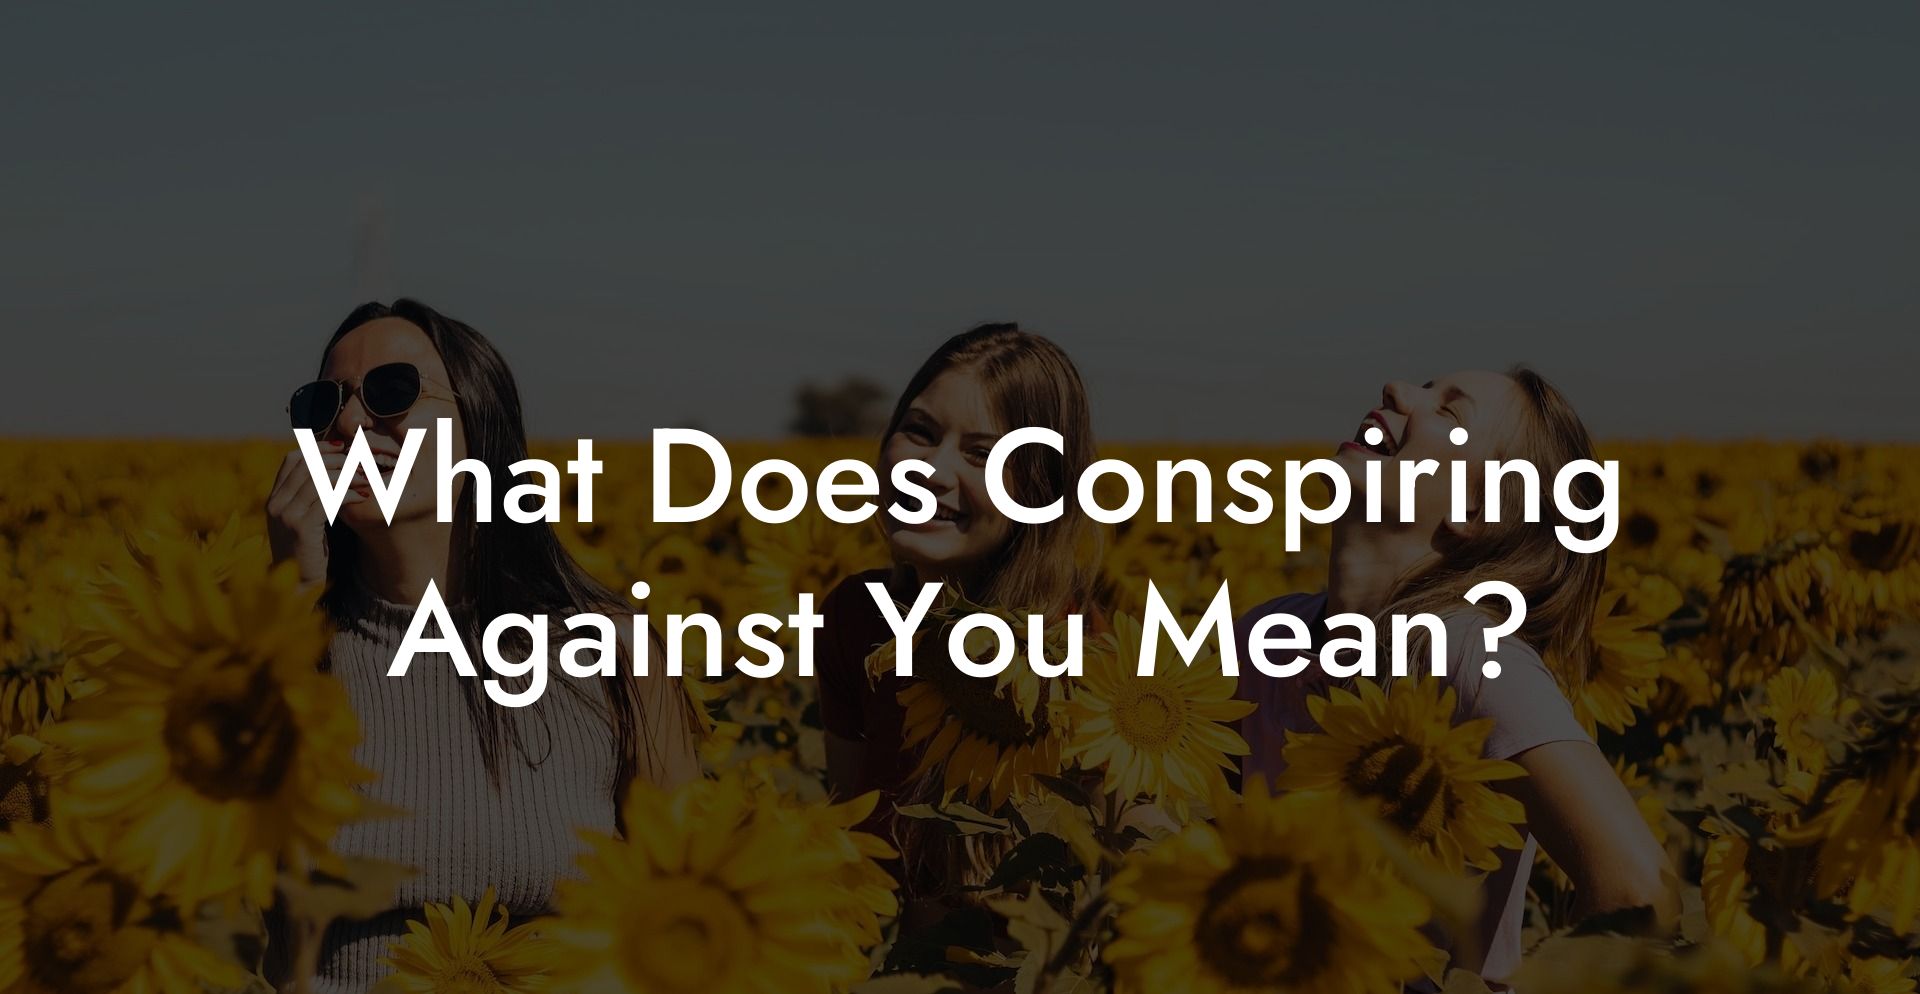 What Does Conspiring Against You Mean?